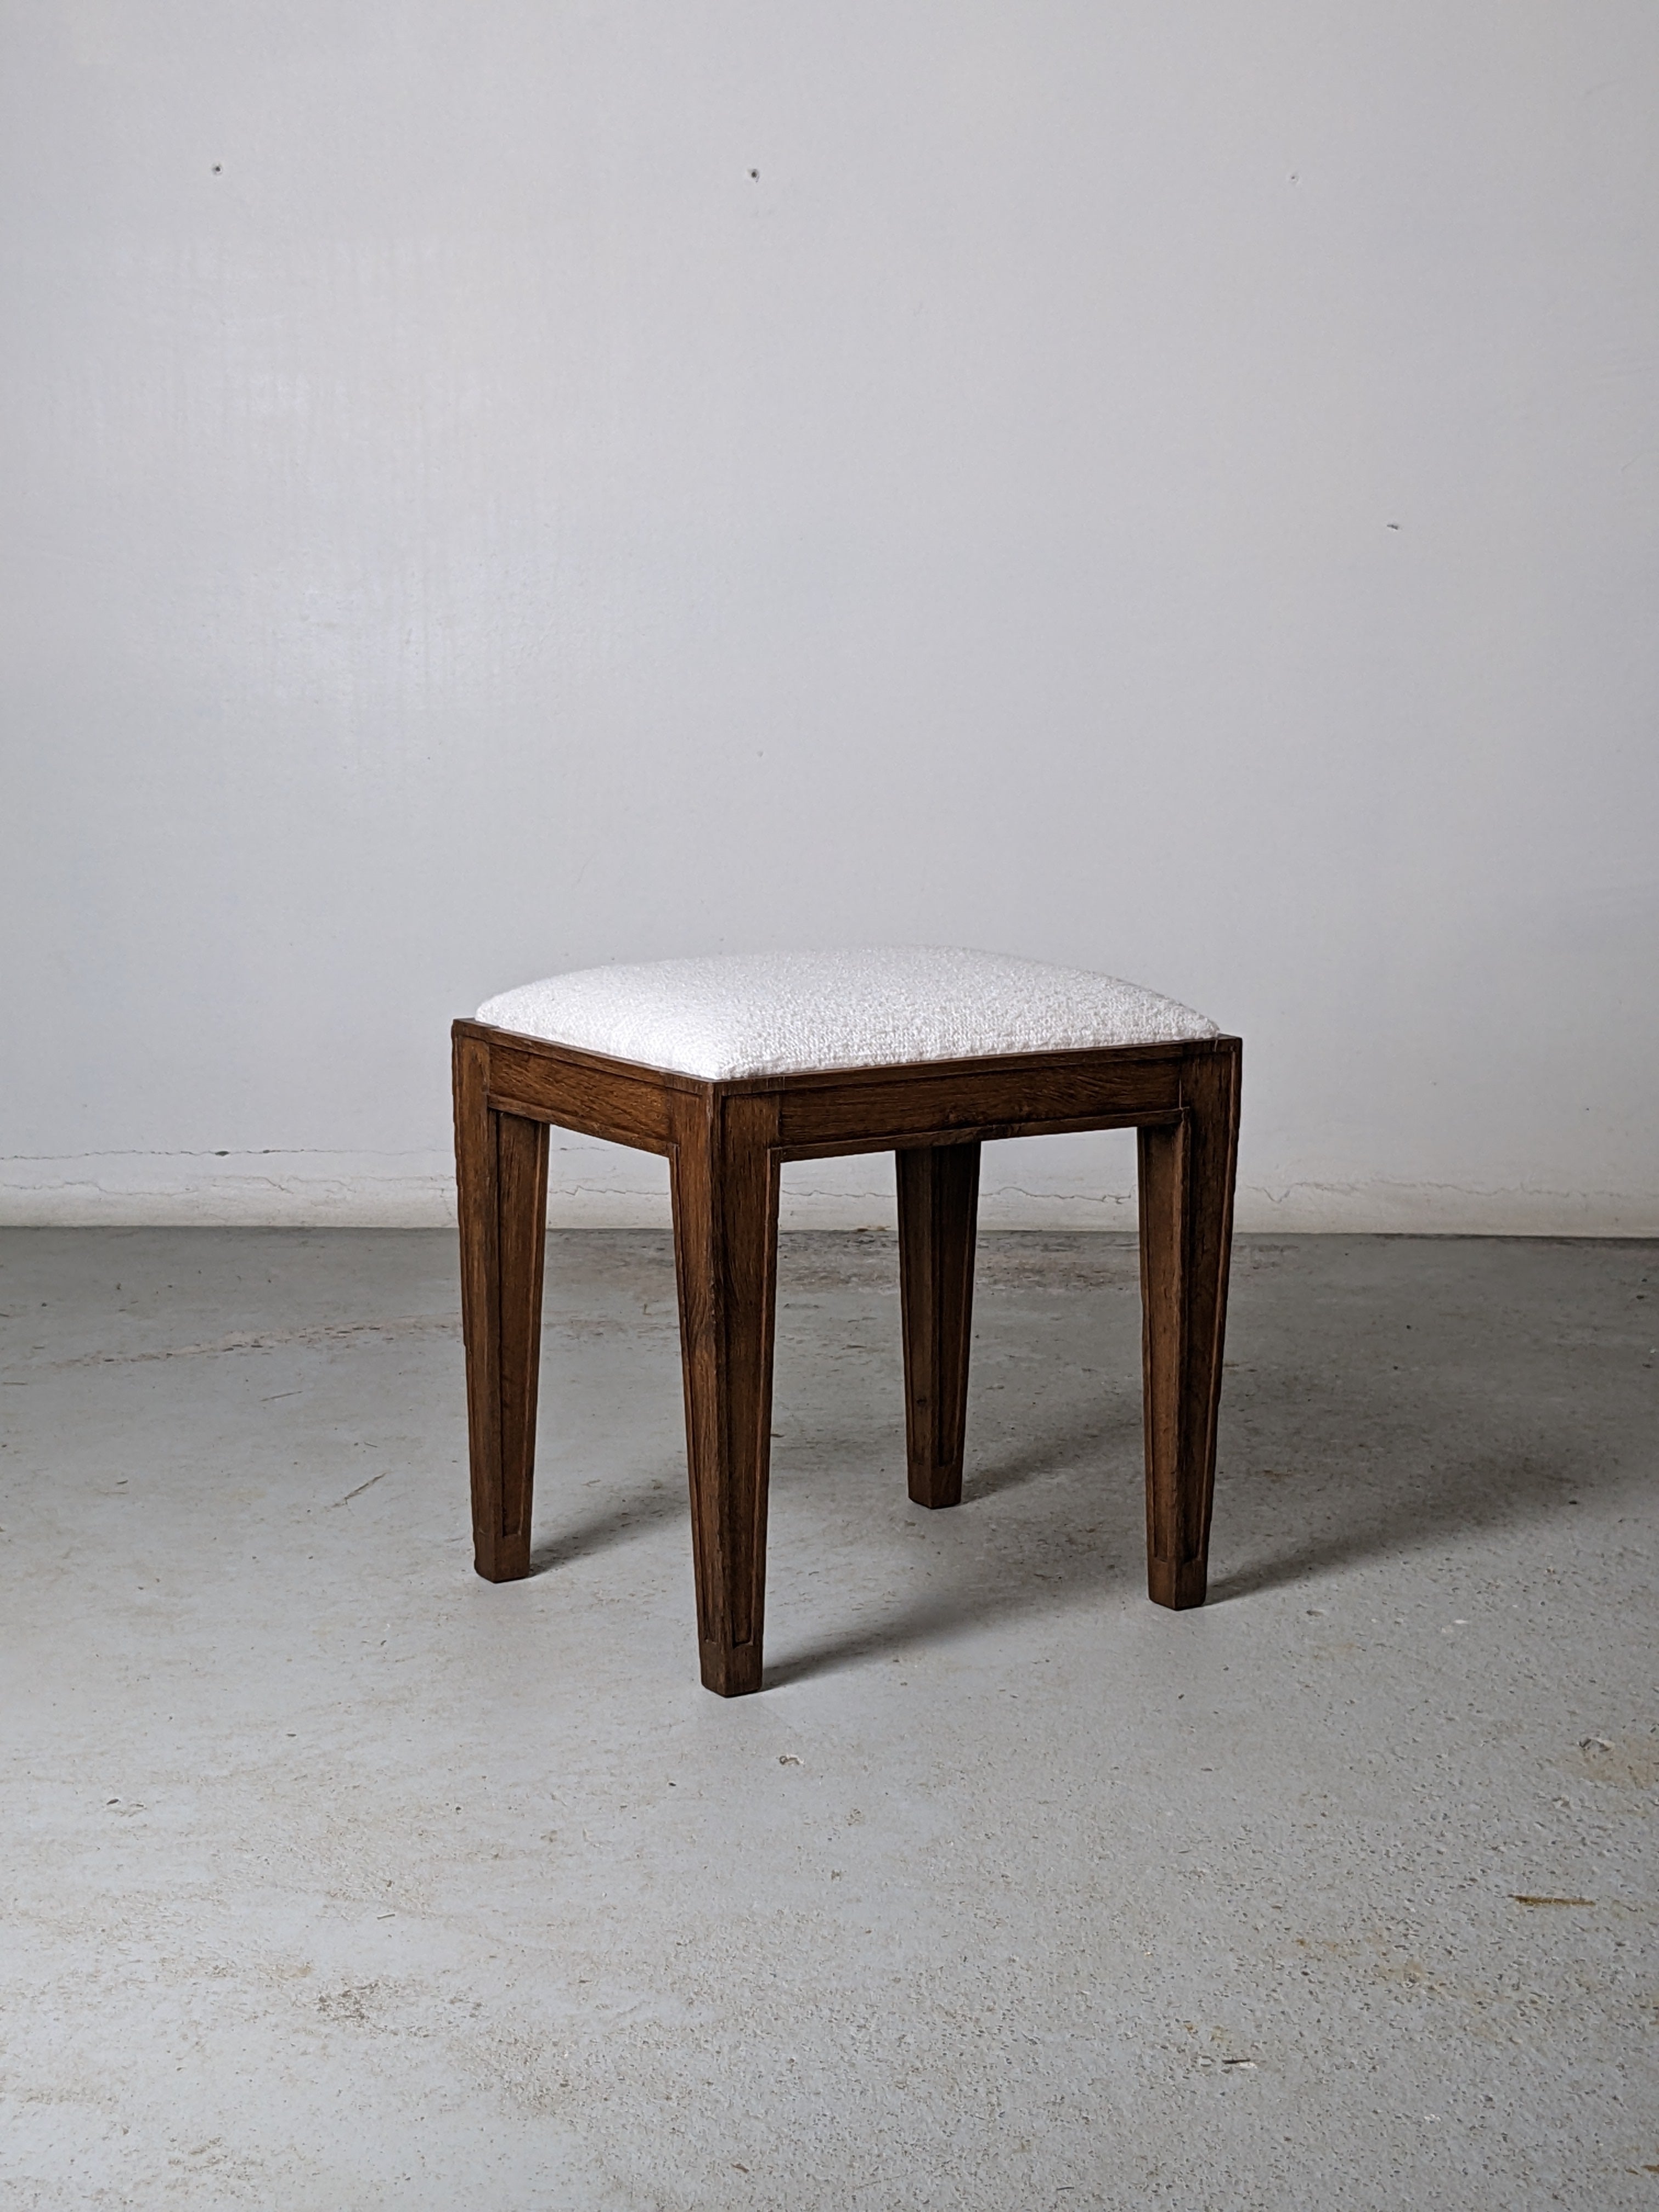 Small stool by french designer Jacques Adnet.
Solid oak wood and upholstery.
Made in France in the 1940s.

Newly reupholstered with Pierre Frey fabric.